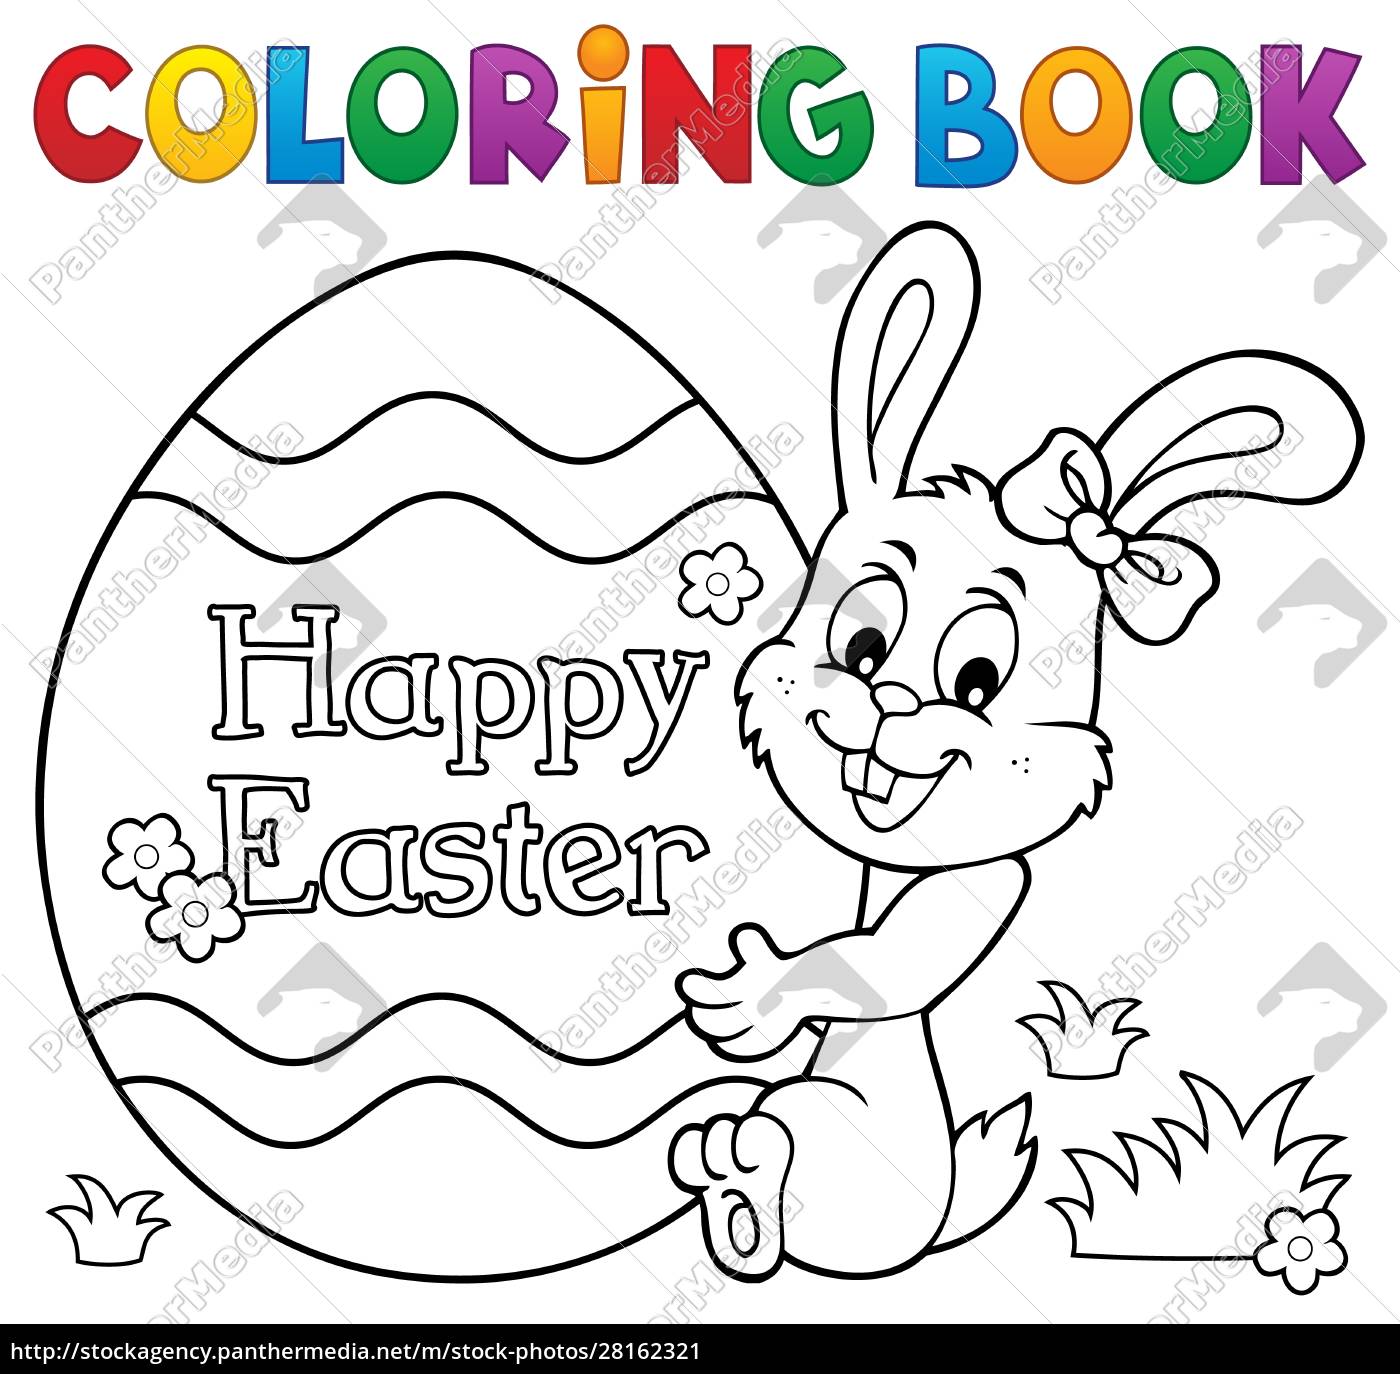 Download Coloring Book Easter Egg And Bunny 1 Stock Photo 28162321 Panthermedia Stock Agency